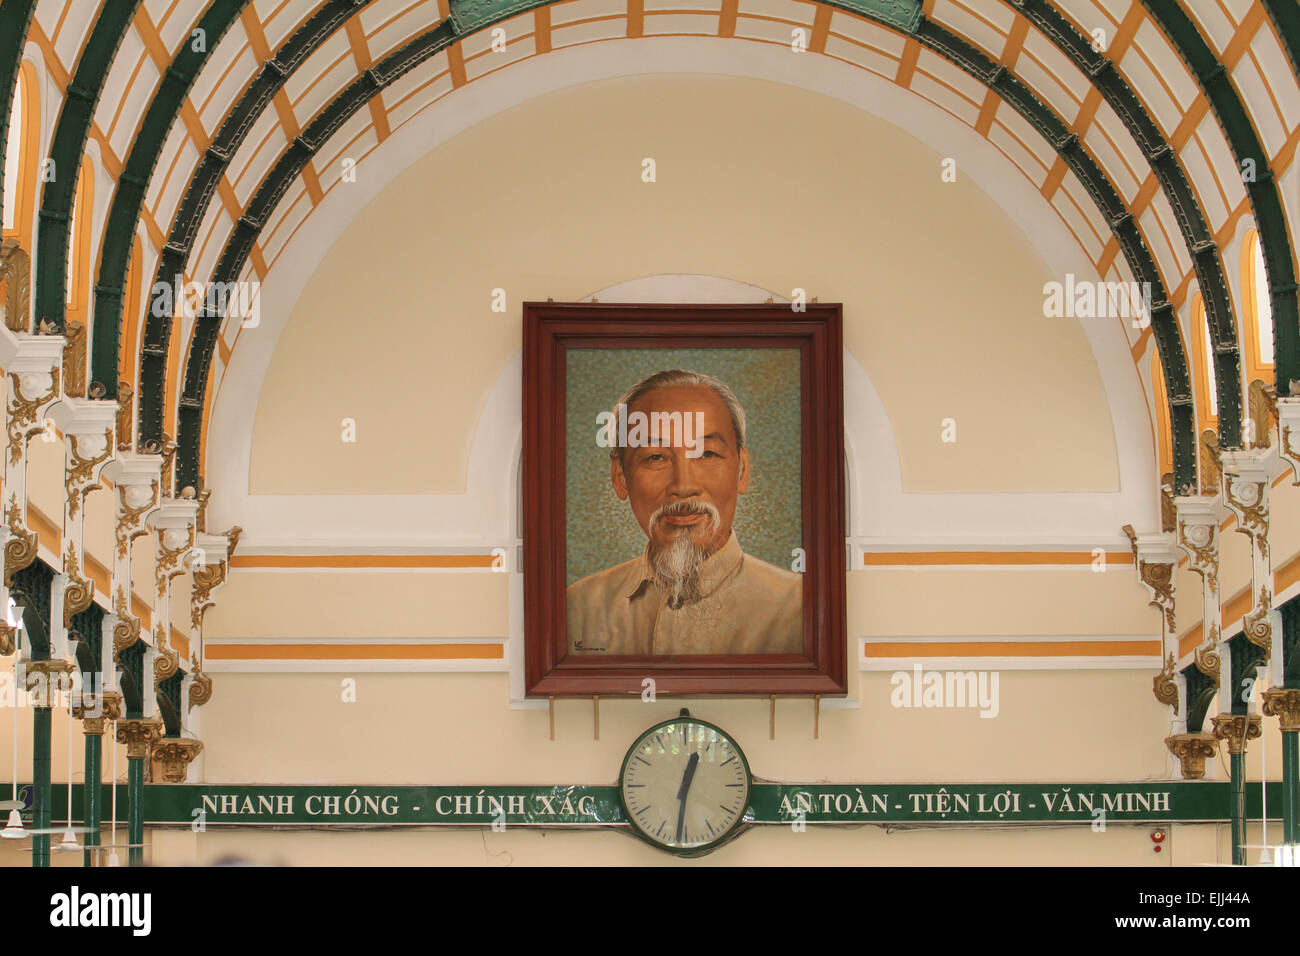 Interior of the Saigon post office with a large portrait of Ho Chi Minh. Ho Chi Minh was a Vietnamese Communist revolutionary leader who was prime minister (1945–55) and president (1945–69) of the Democratic Republic of Vietnam (North Vietnam) . Credit: David Mbiyu/ Alamy Live News Stock Photo